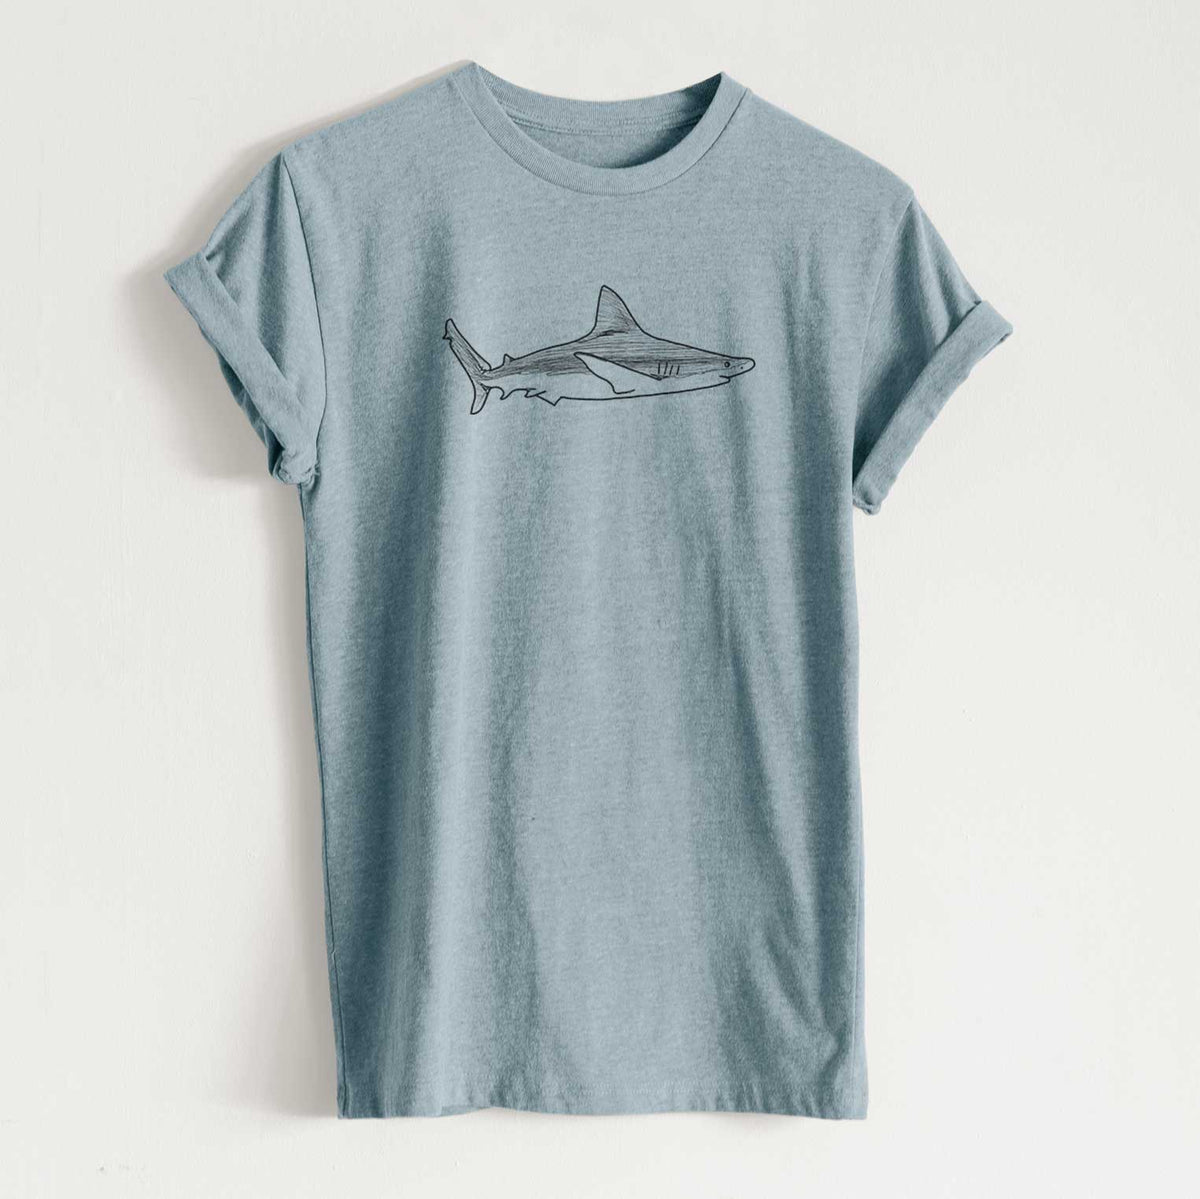 Silvertip Shark Side - Unisex Recycled Eco Tee  - CLOSEOUT - FINAL SALE